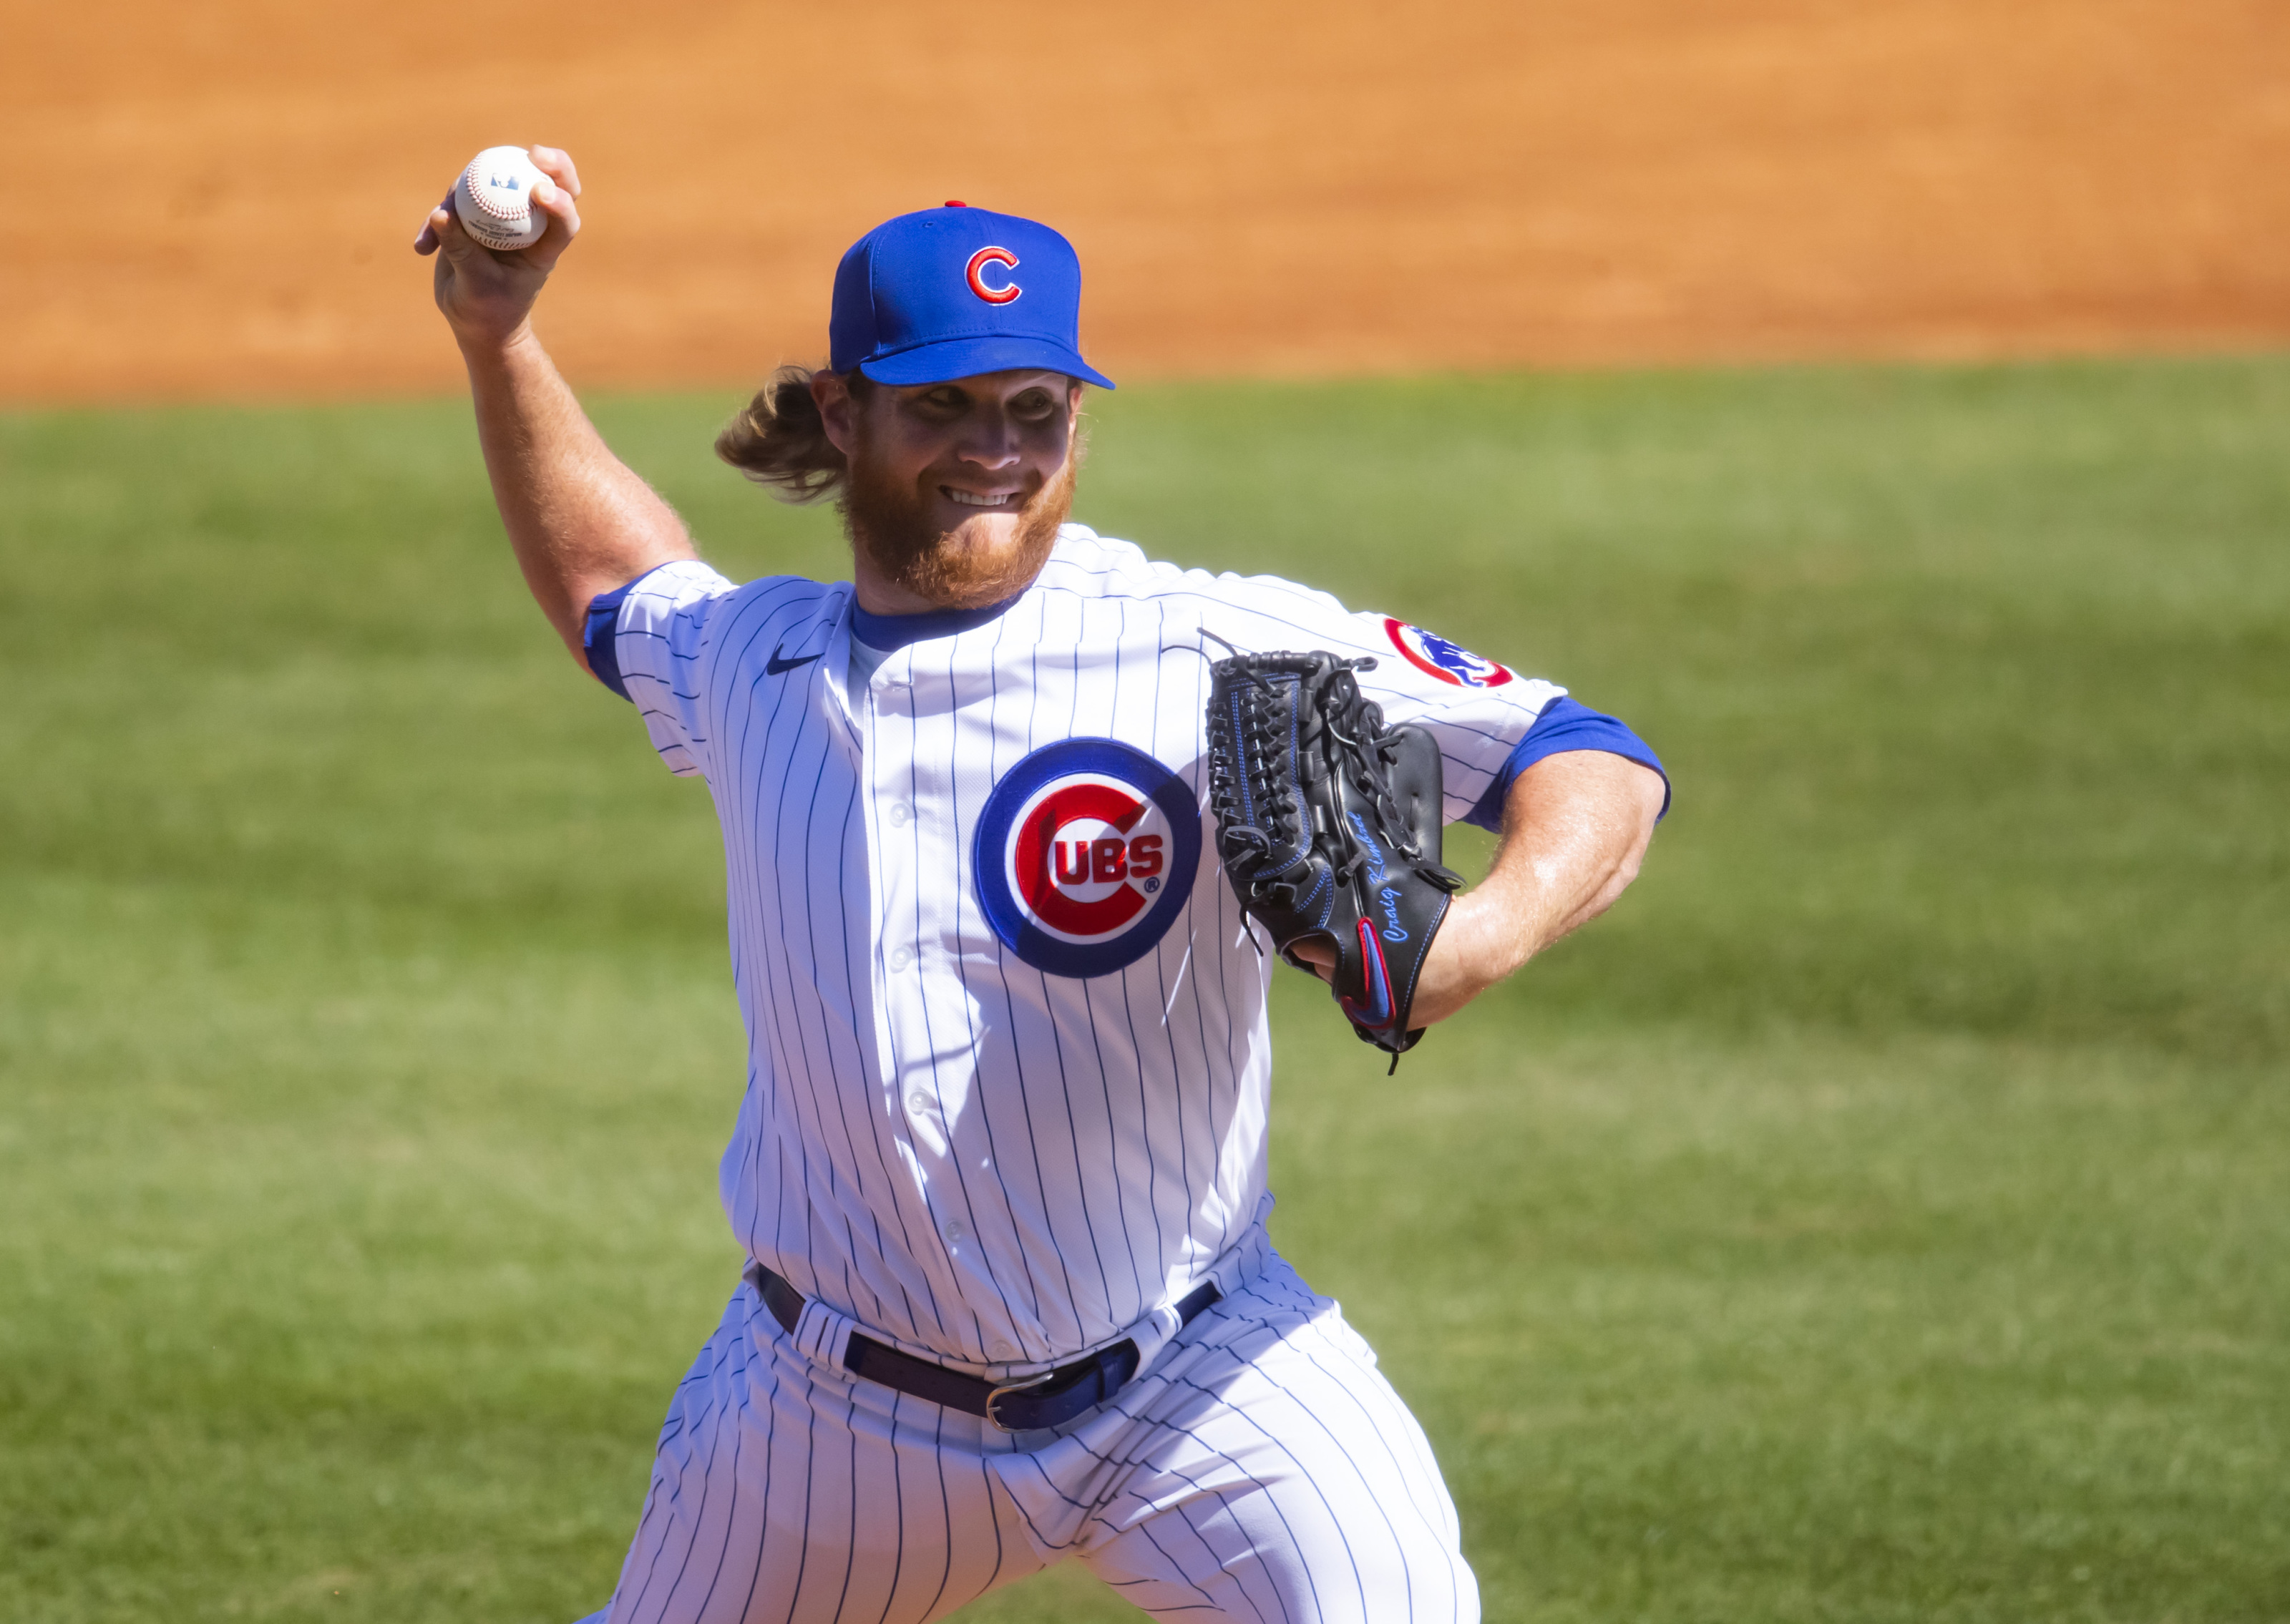 What to expect in Cubs Spring Training